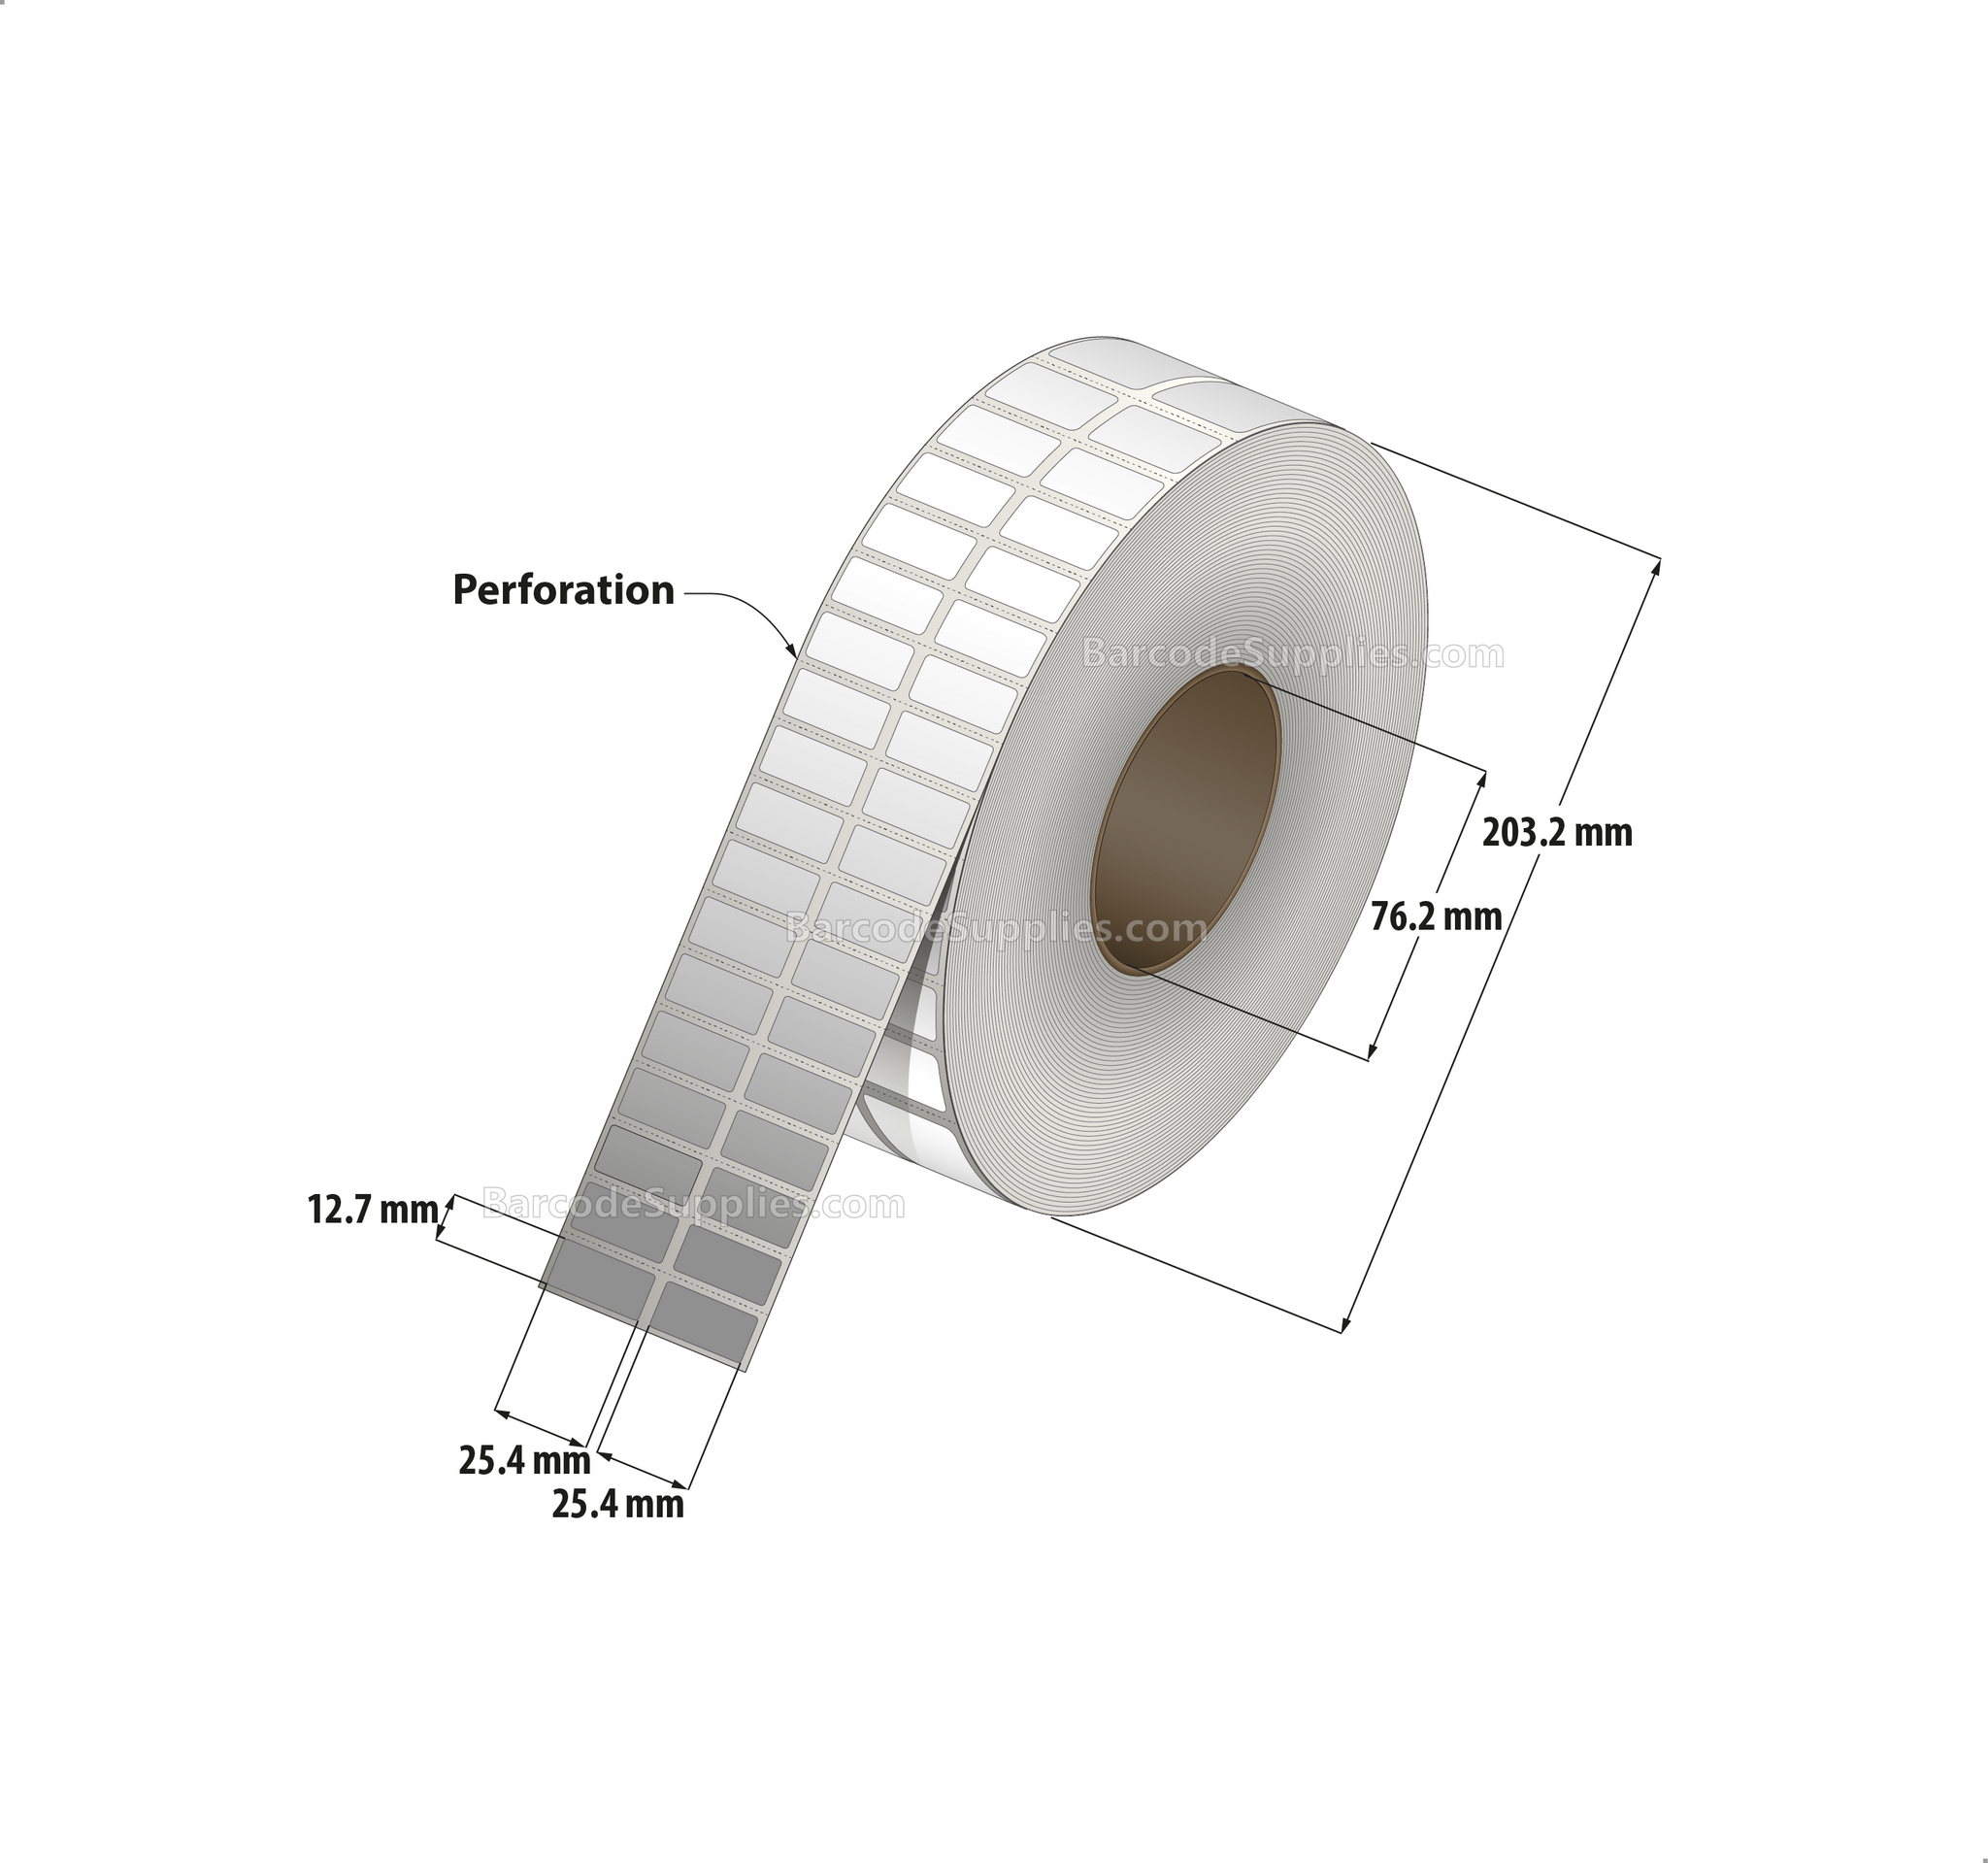 1 x 0.5 Thermal Transfer White Labels With Permanent Adhesive - Perforated - 19,200 Labels Per Roll - Carton Of 8 Rolls - 153600 Labels Total - MPN: RT-1-05-19200-3